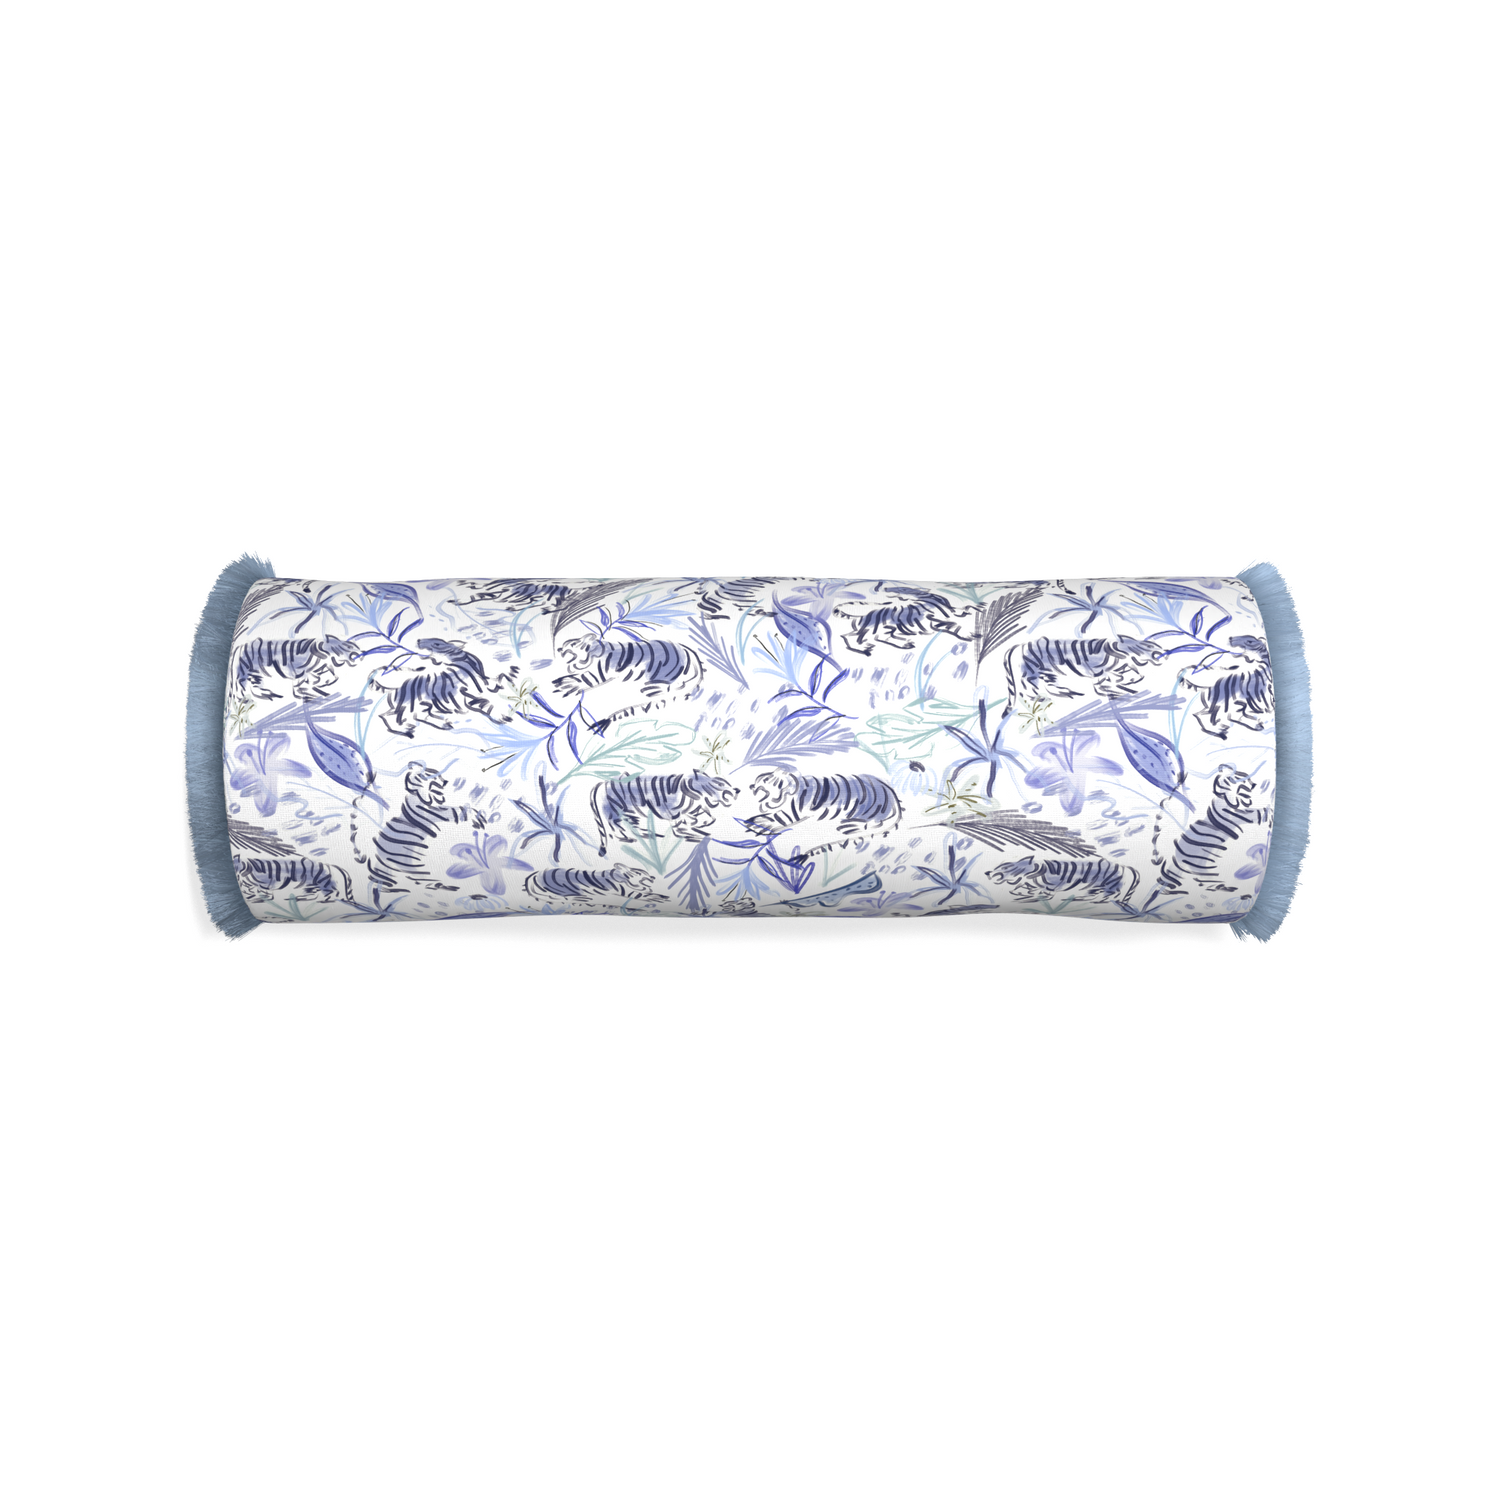 Bolster frida blue custom blue with intricate tiger designpillow with sky fringe on white background